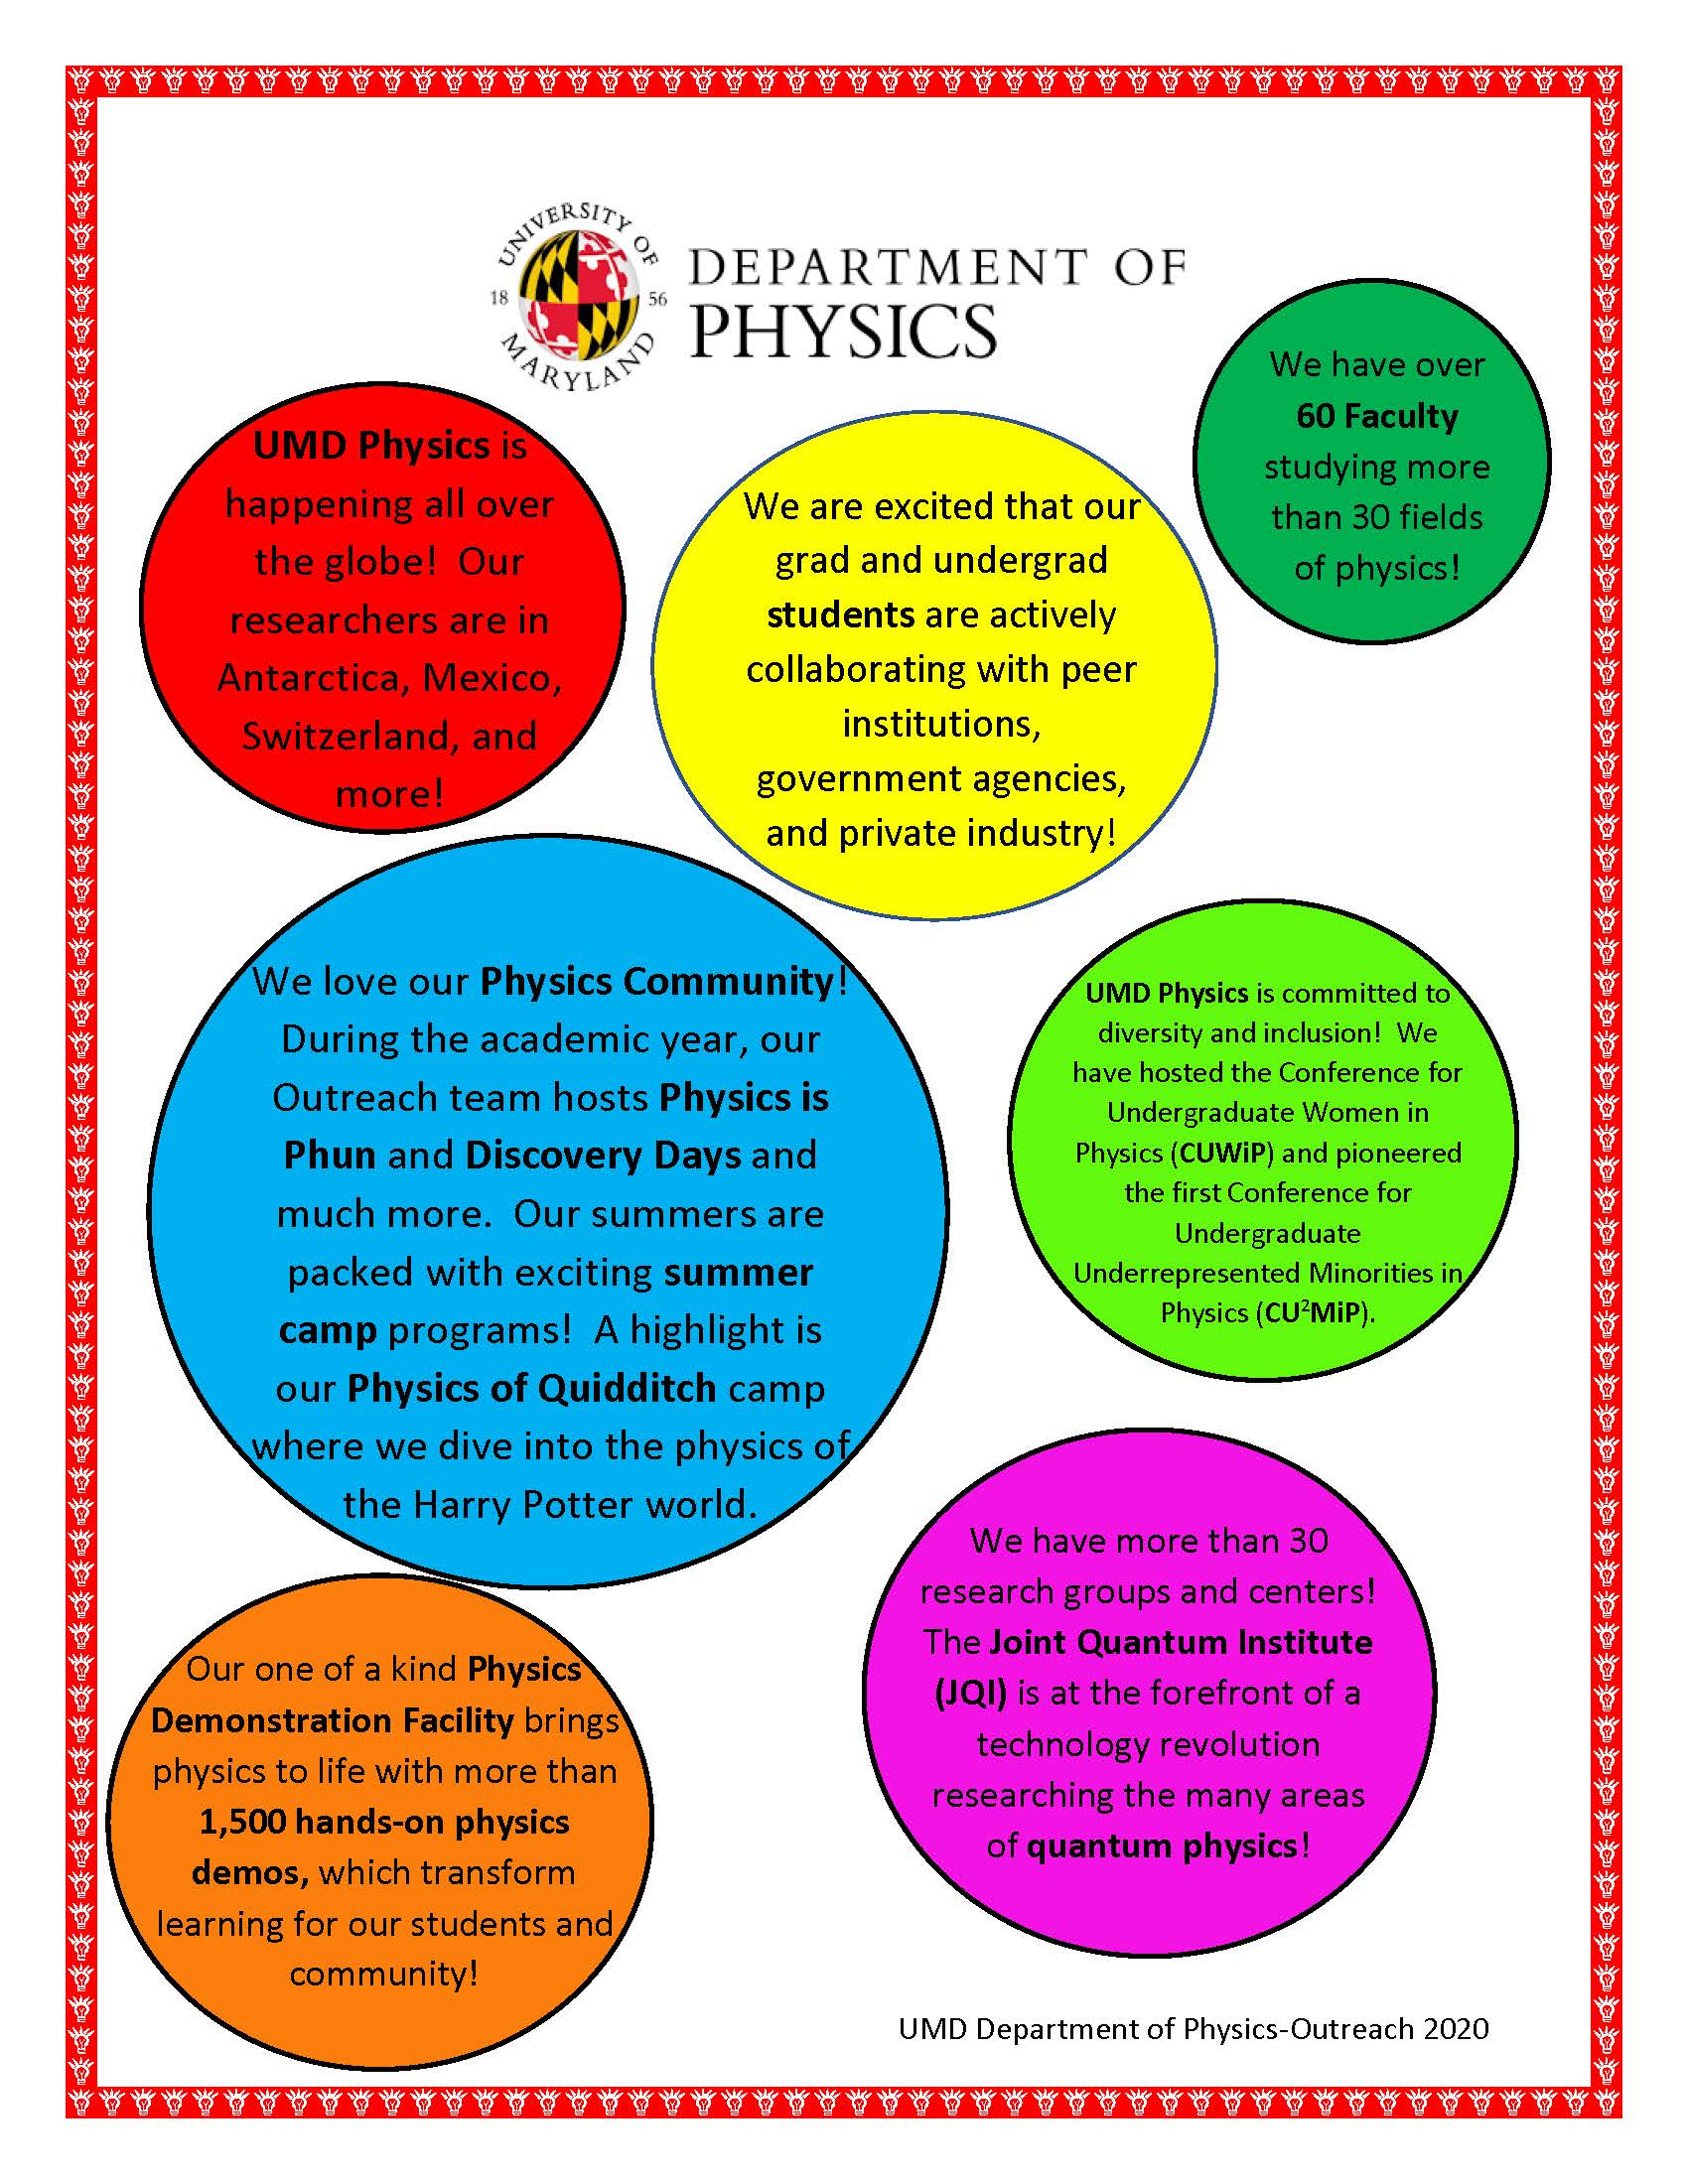 MD Day 2020 Department of Physics Page 02